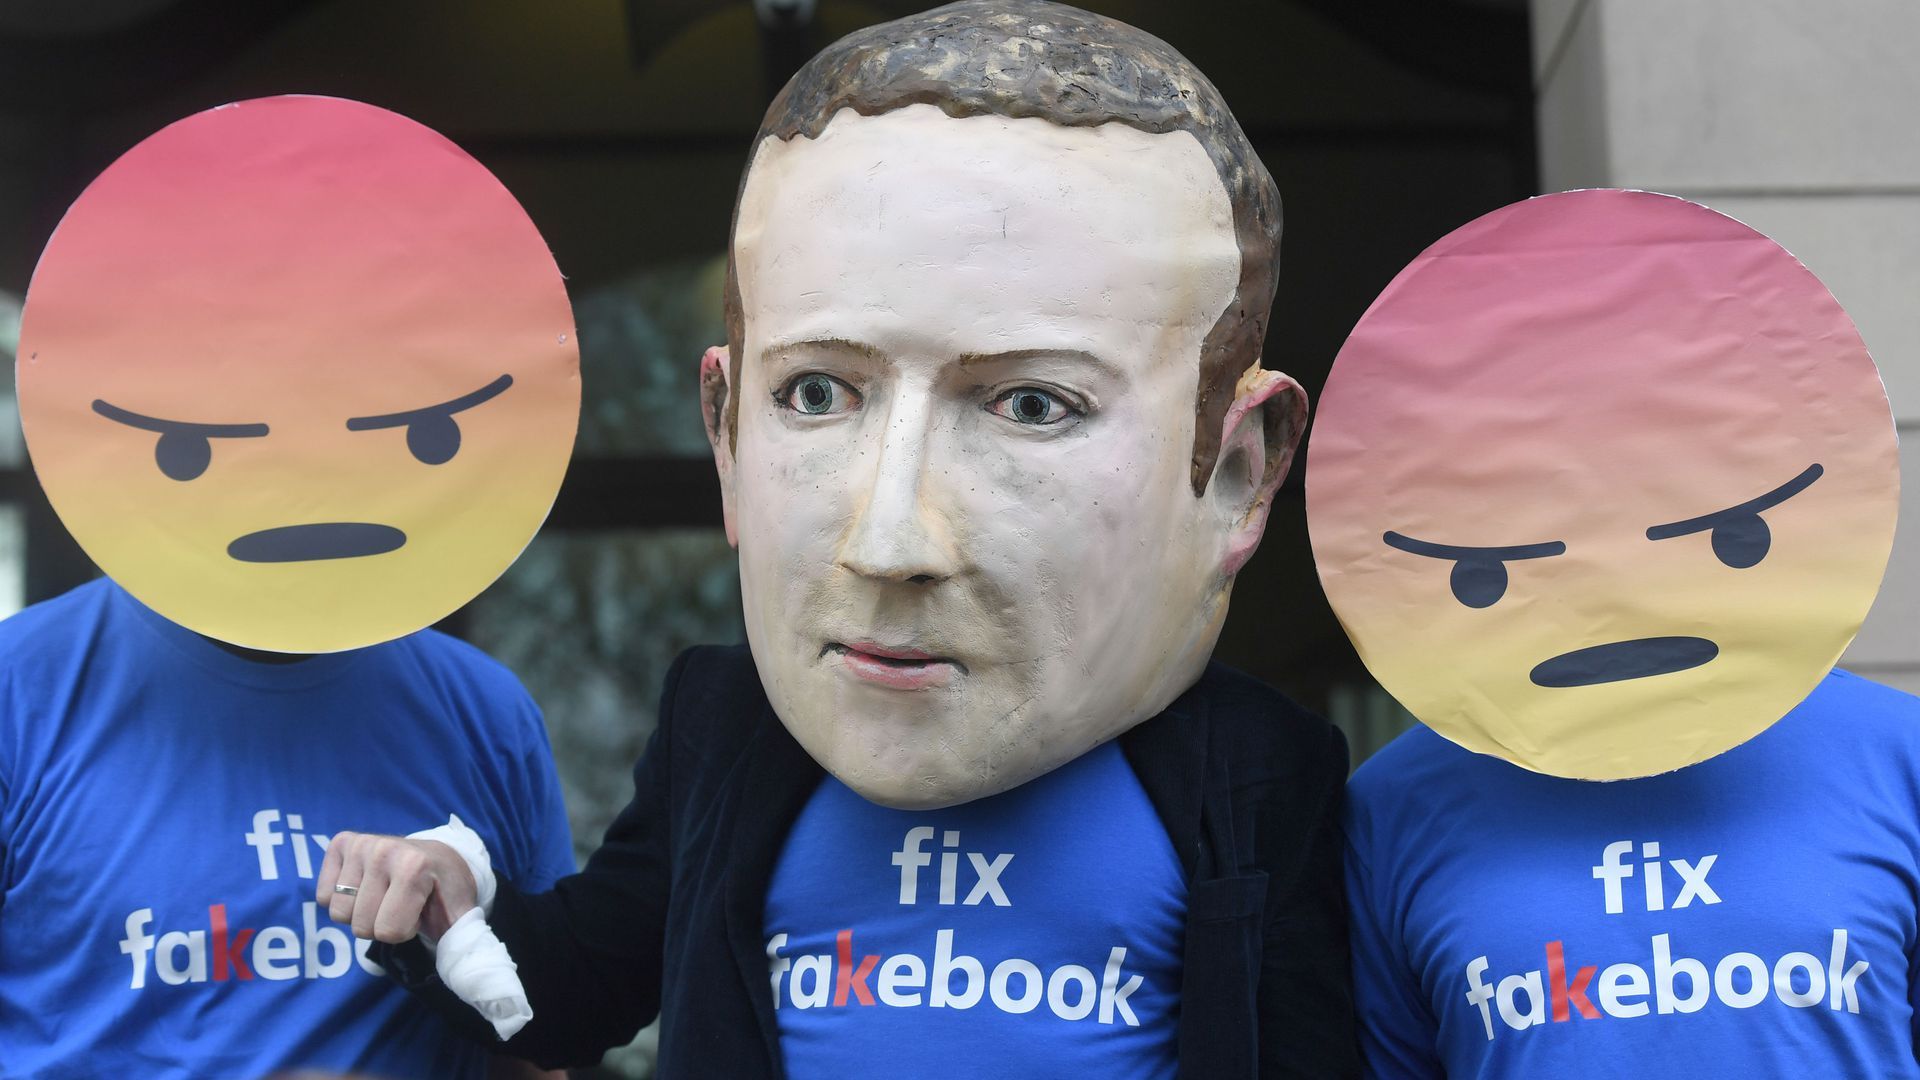 Giant puppet head of Mark Zuckerberg worn by a protester in London